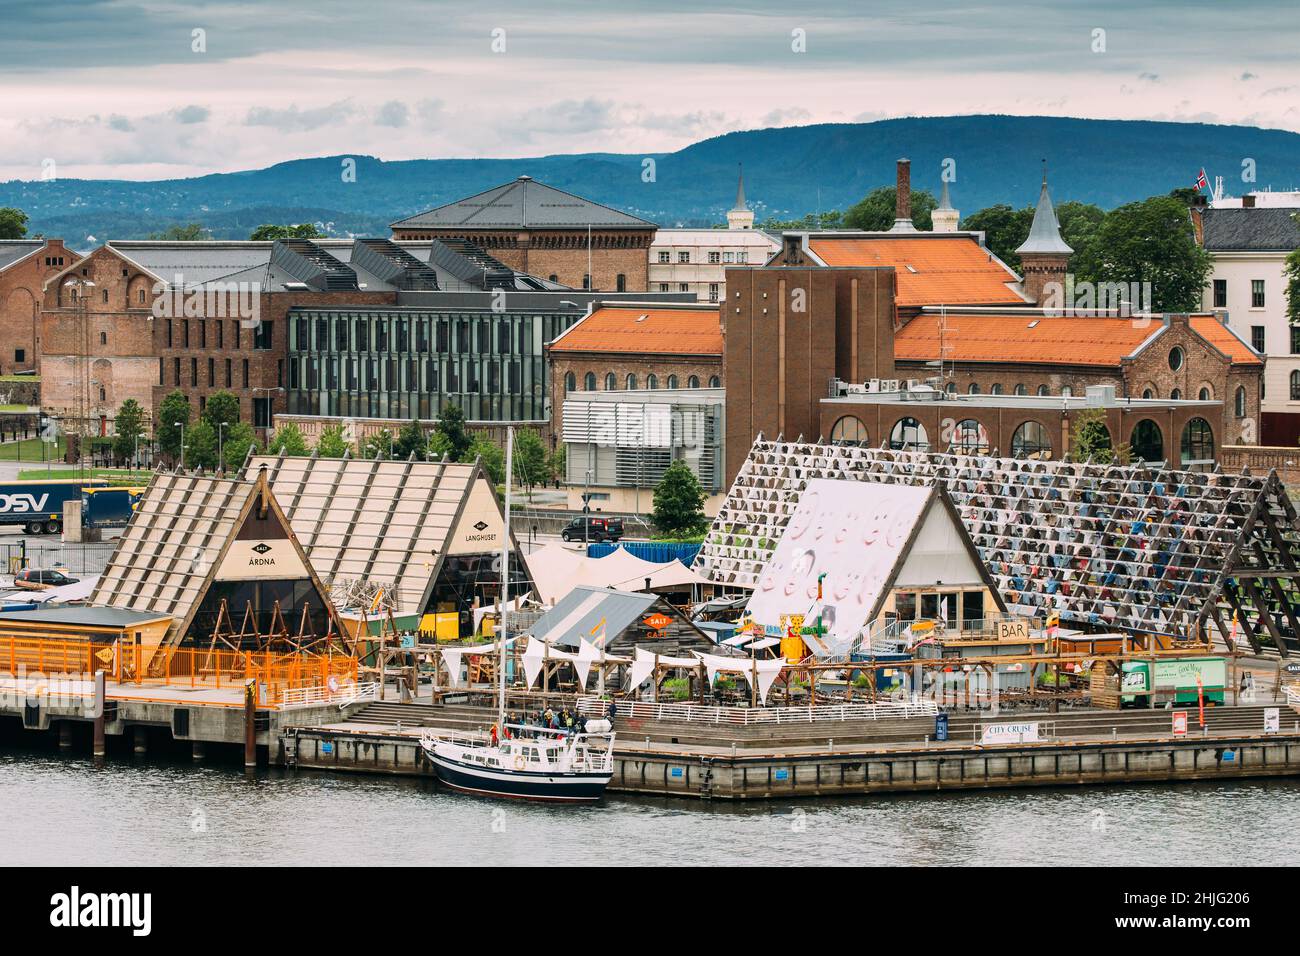 Oslo, Norway - June 12, 2019: Nomadic art project SALT on Langkaia. The  project brings together art, music, food and architecture in several Stock  Photo - Alamy